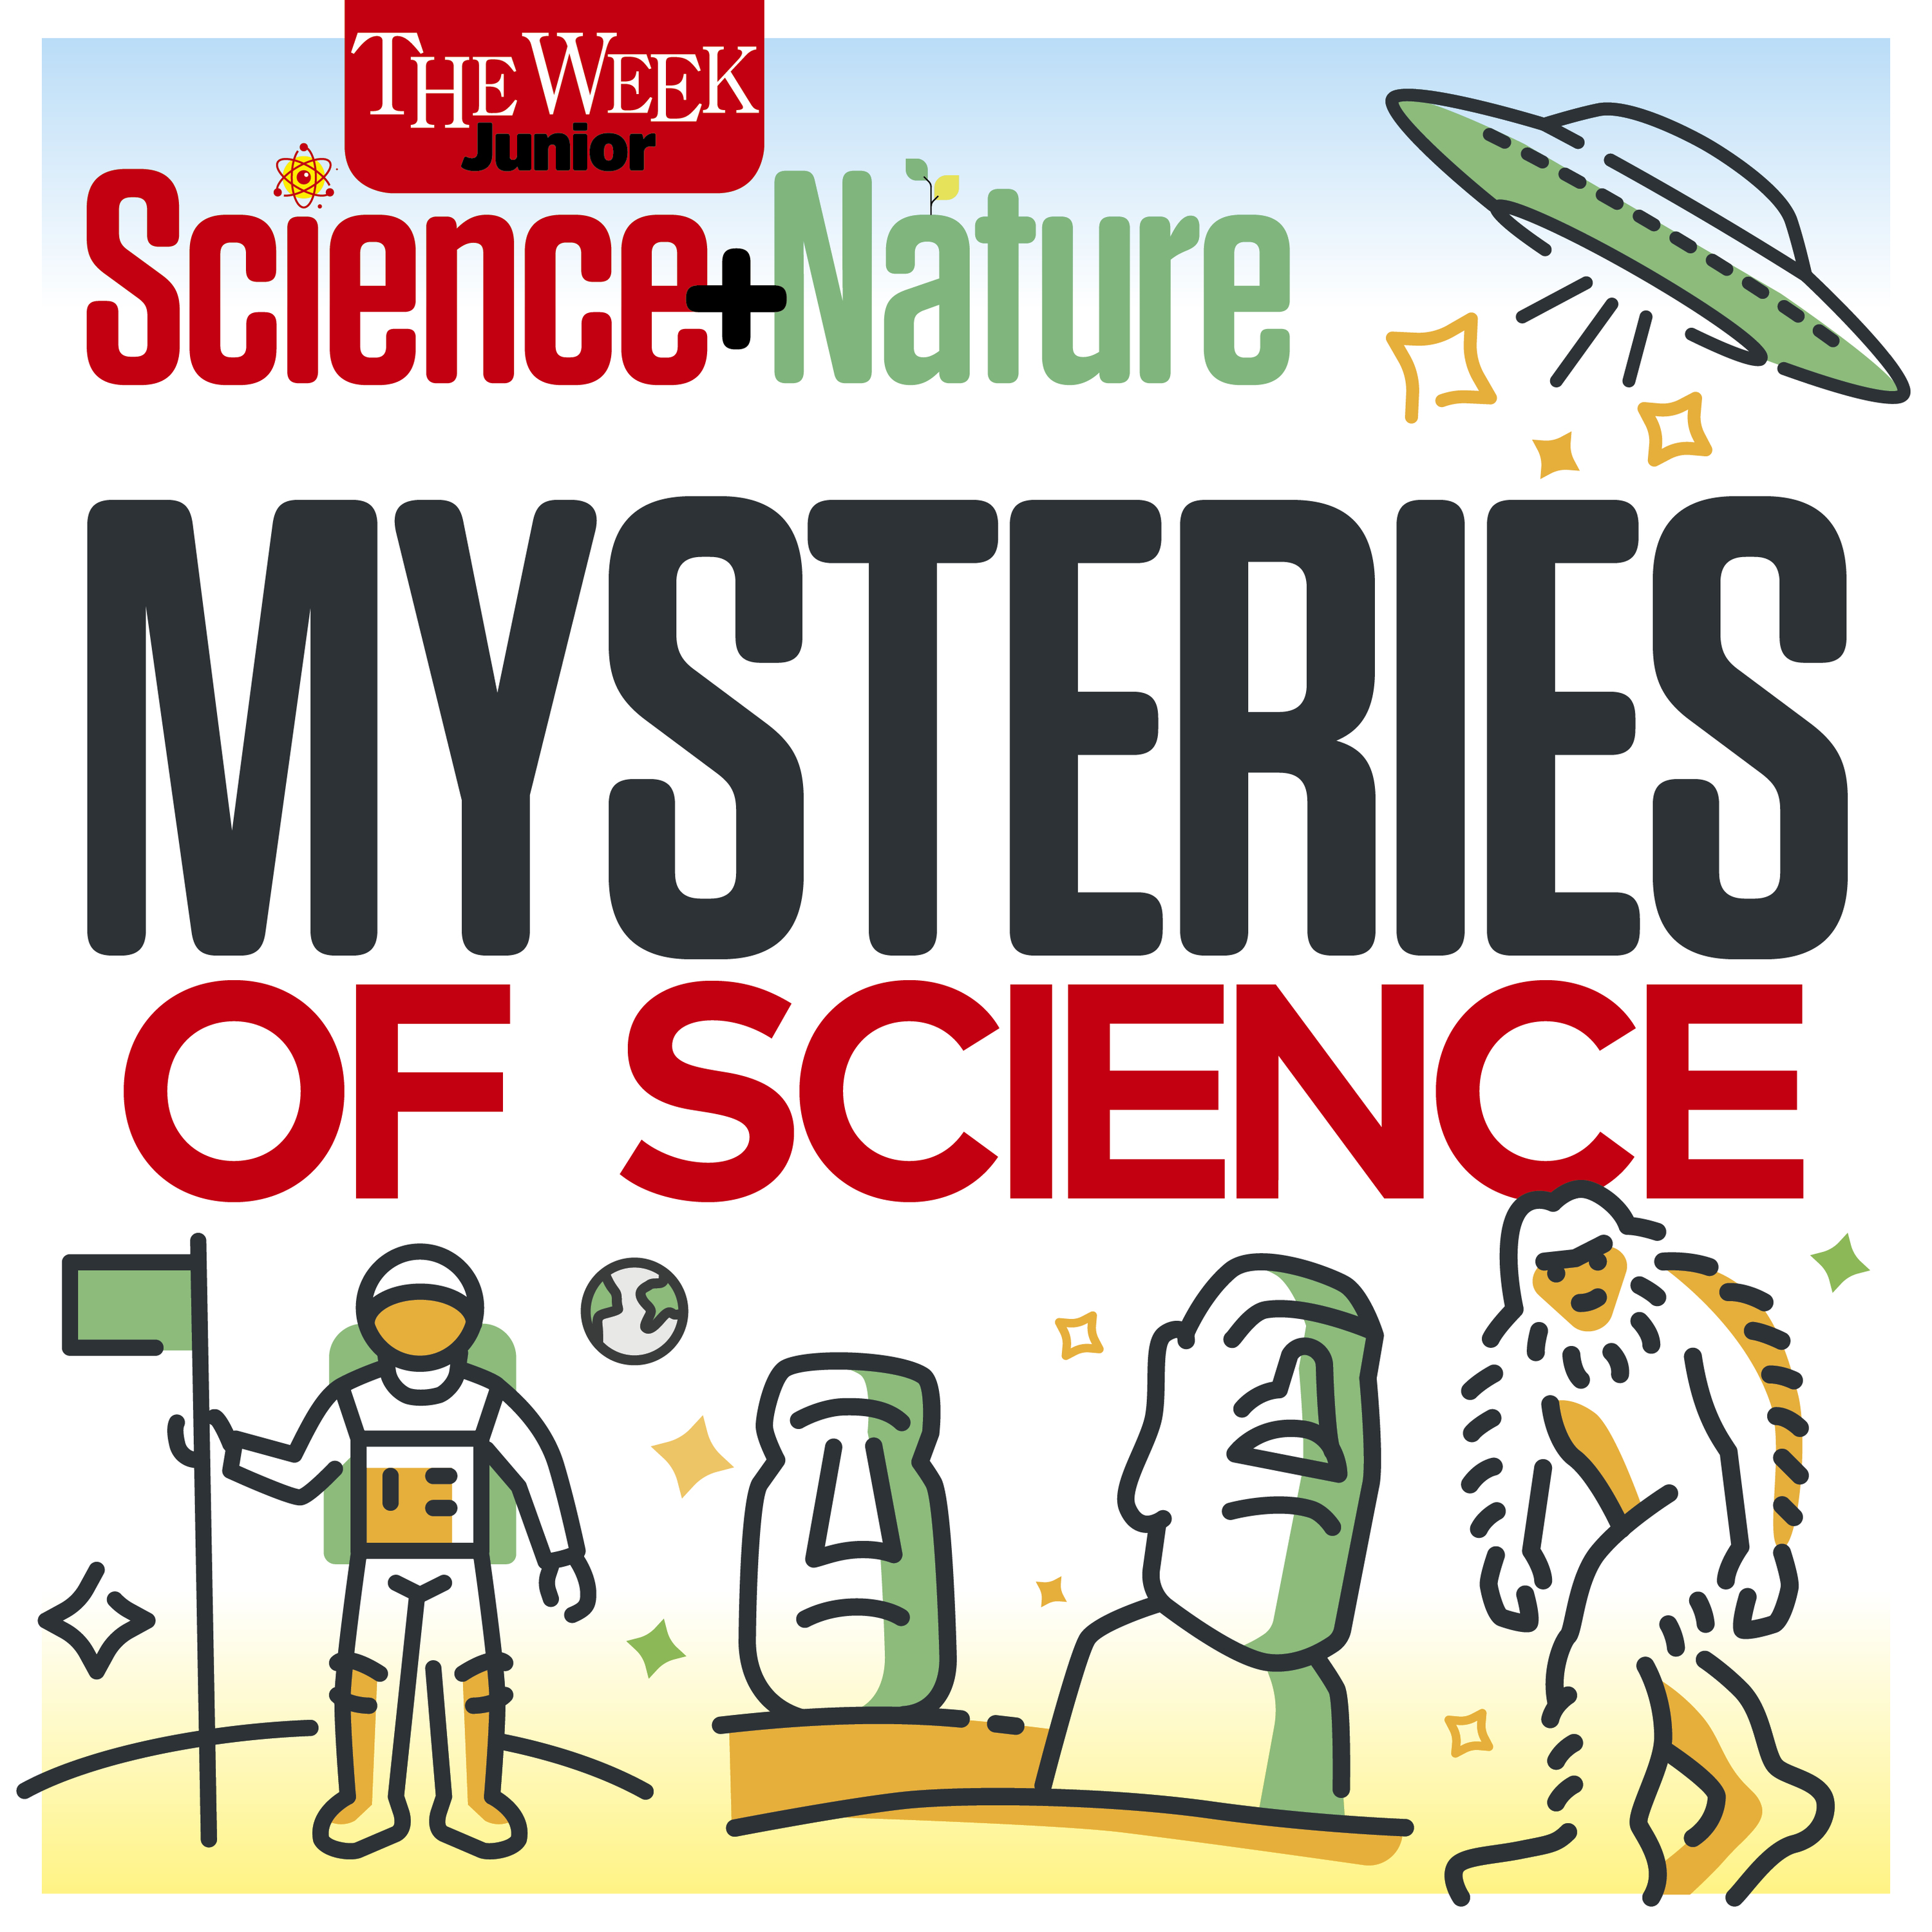 What is Mysteries of Science?